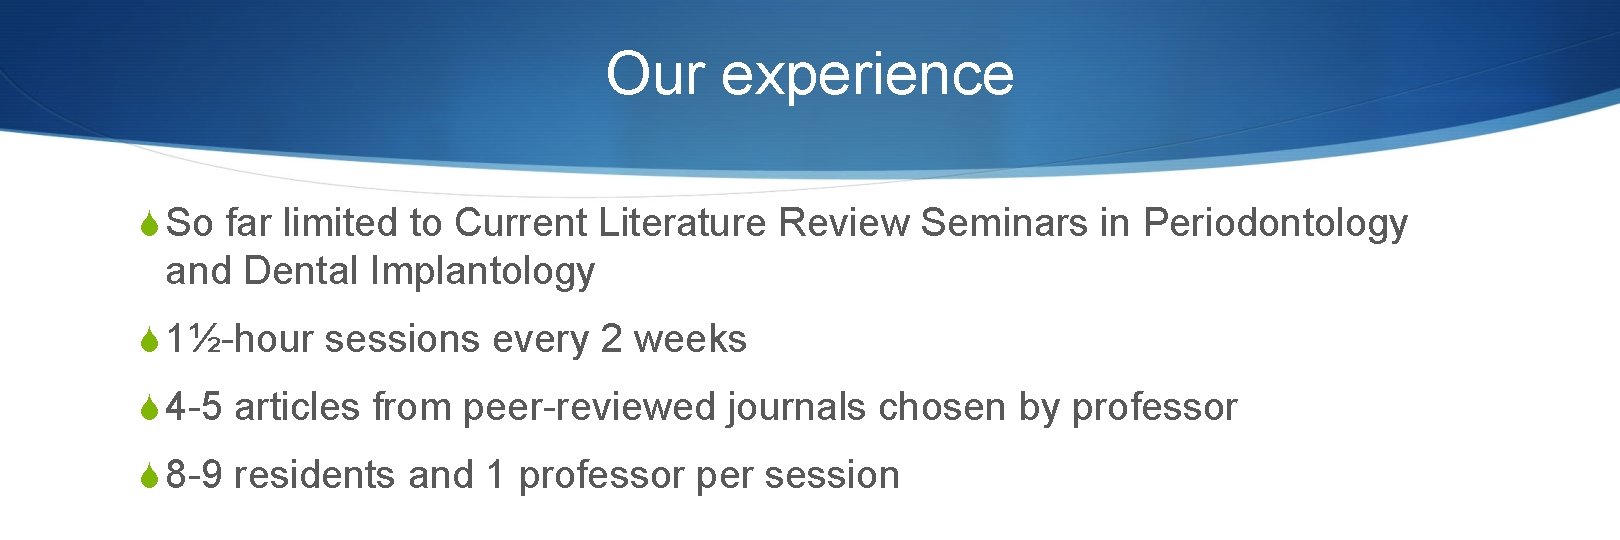 Our experience S So far limited to Current Literature Review Seminars in Periodontology and